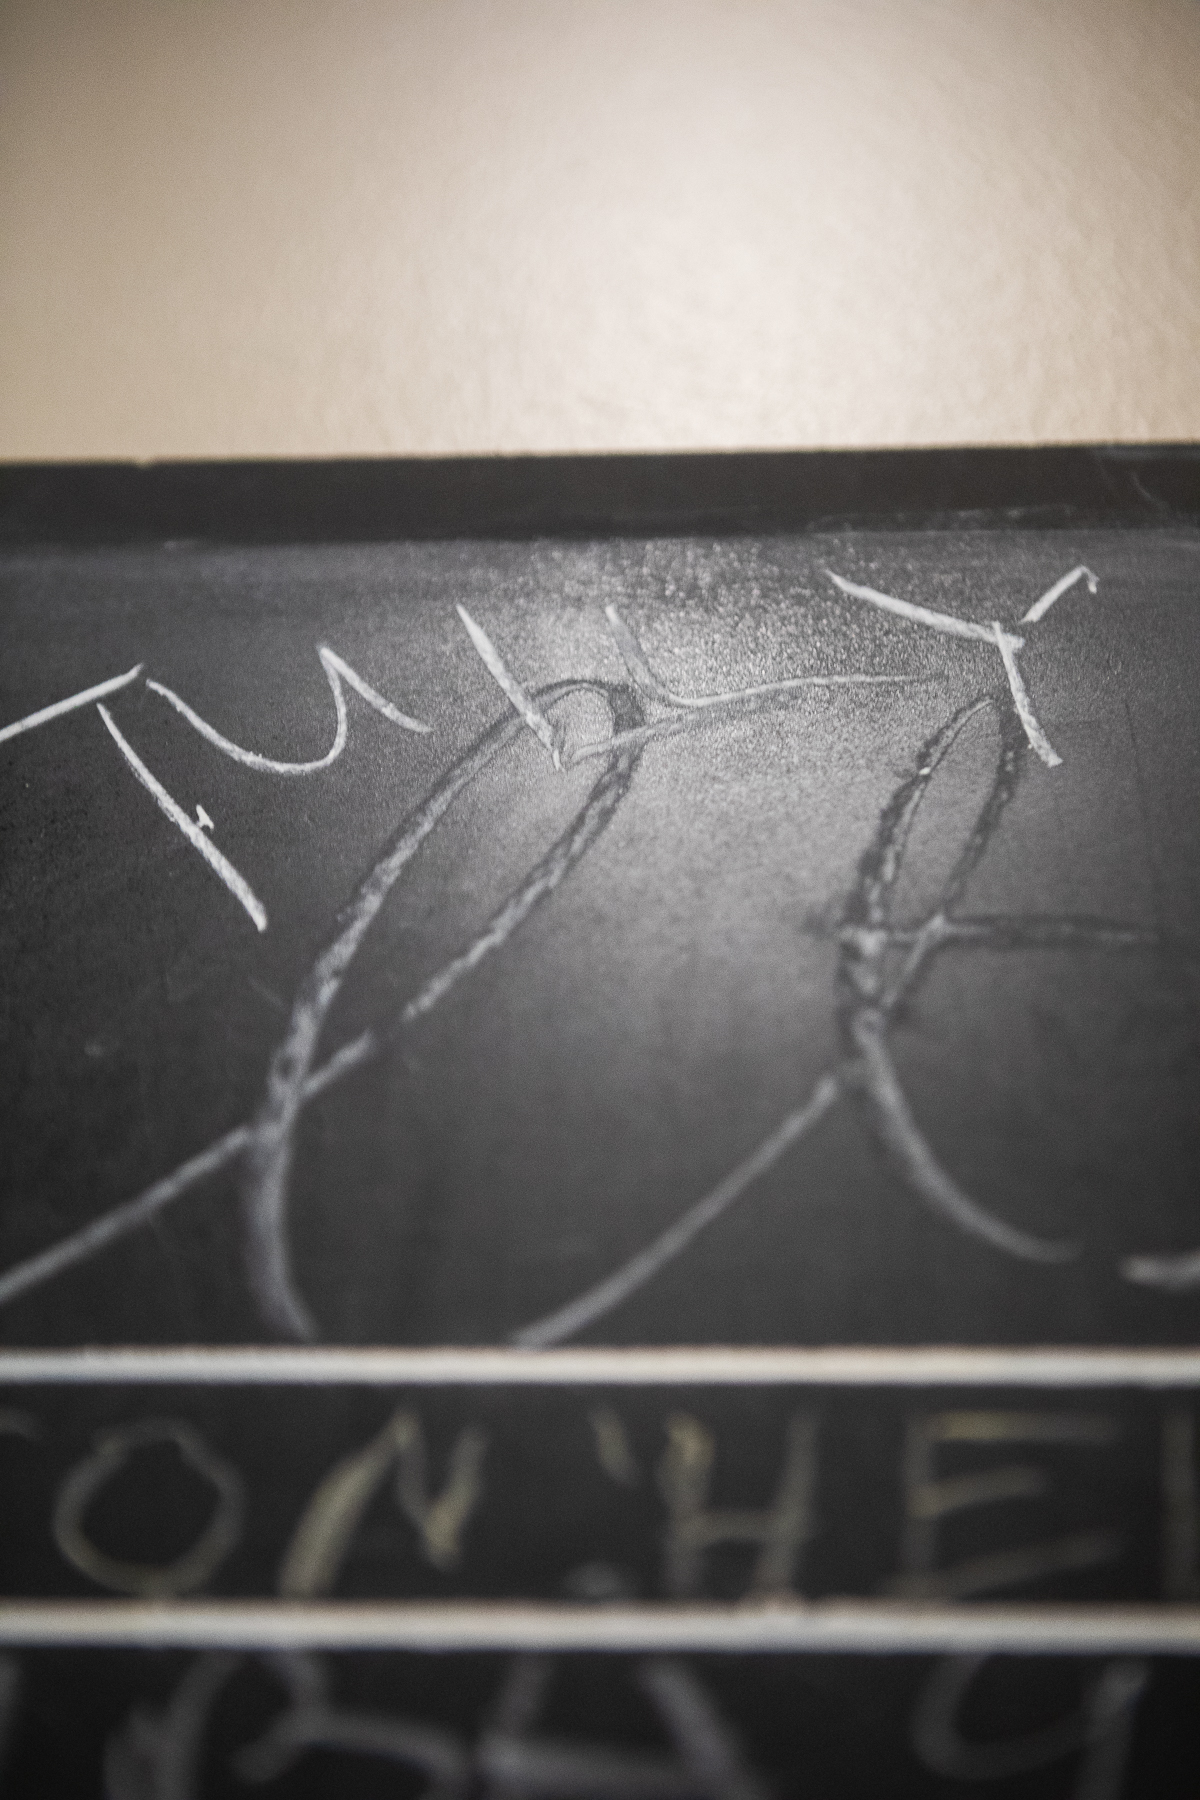 An image of a black board with white chalk writing on it. One word clearly reads "Tully."